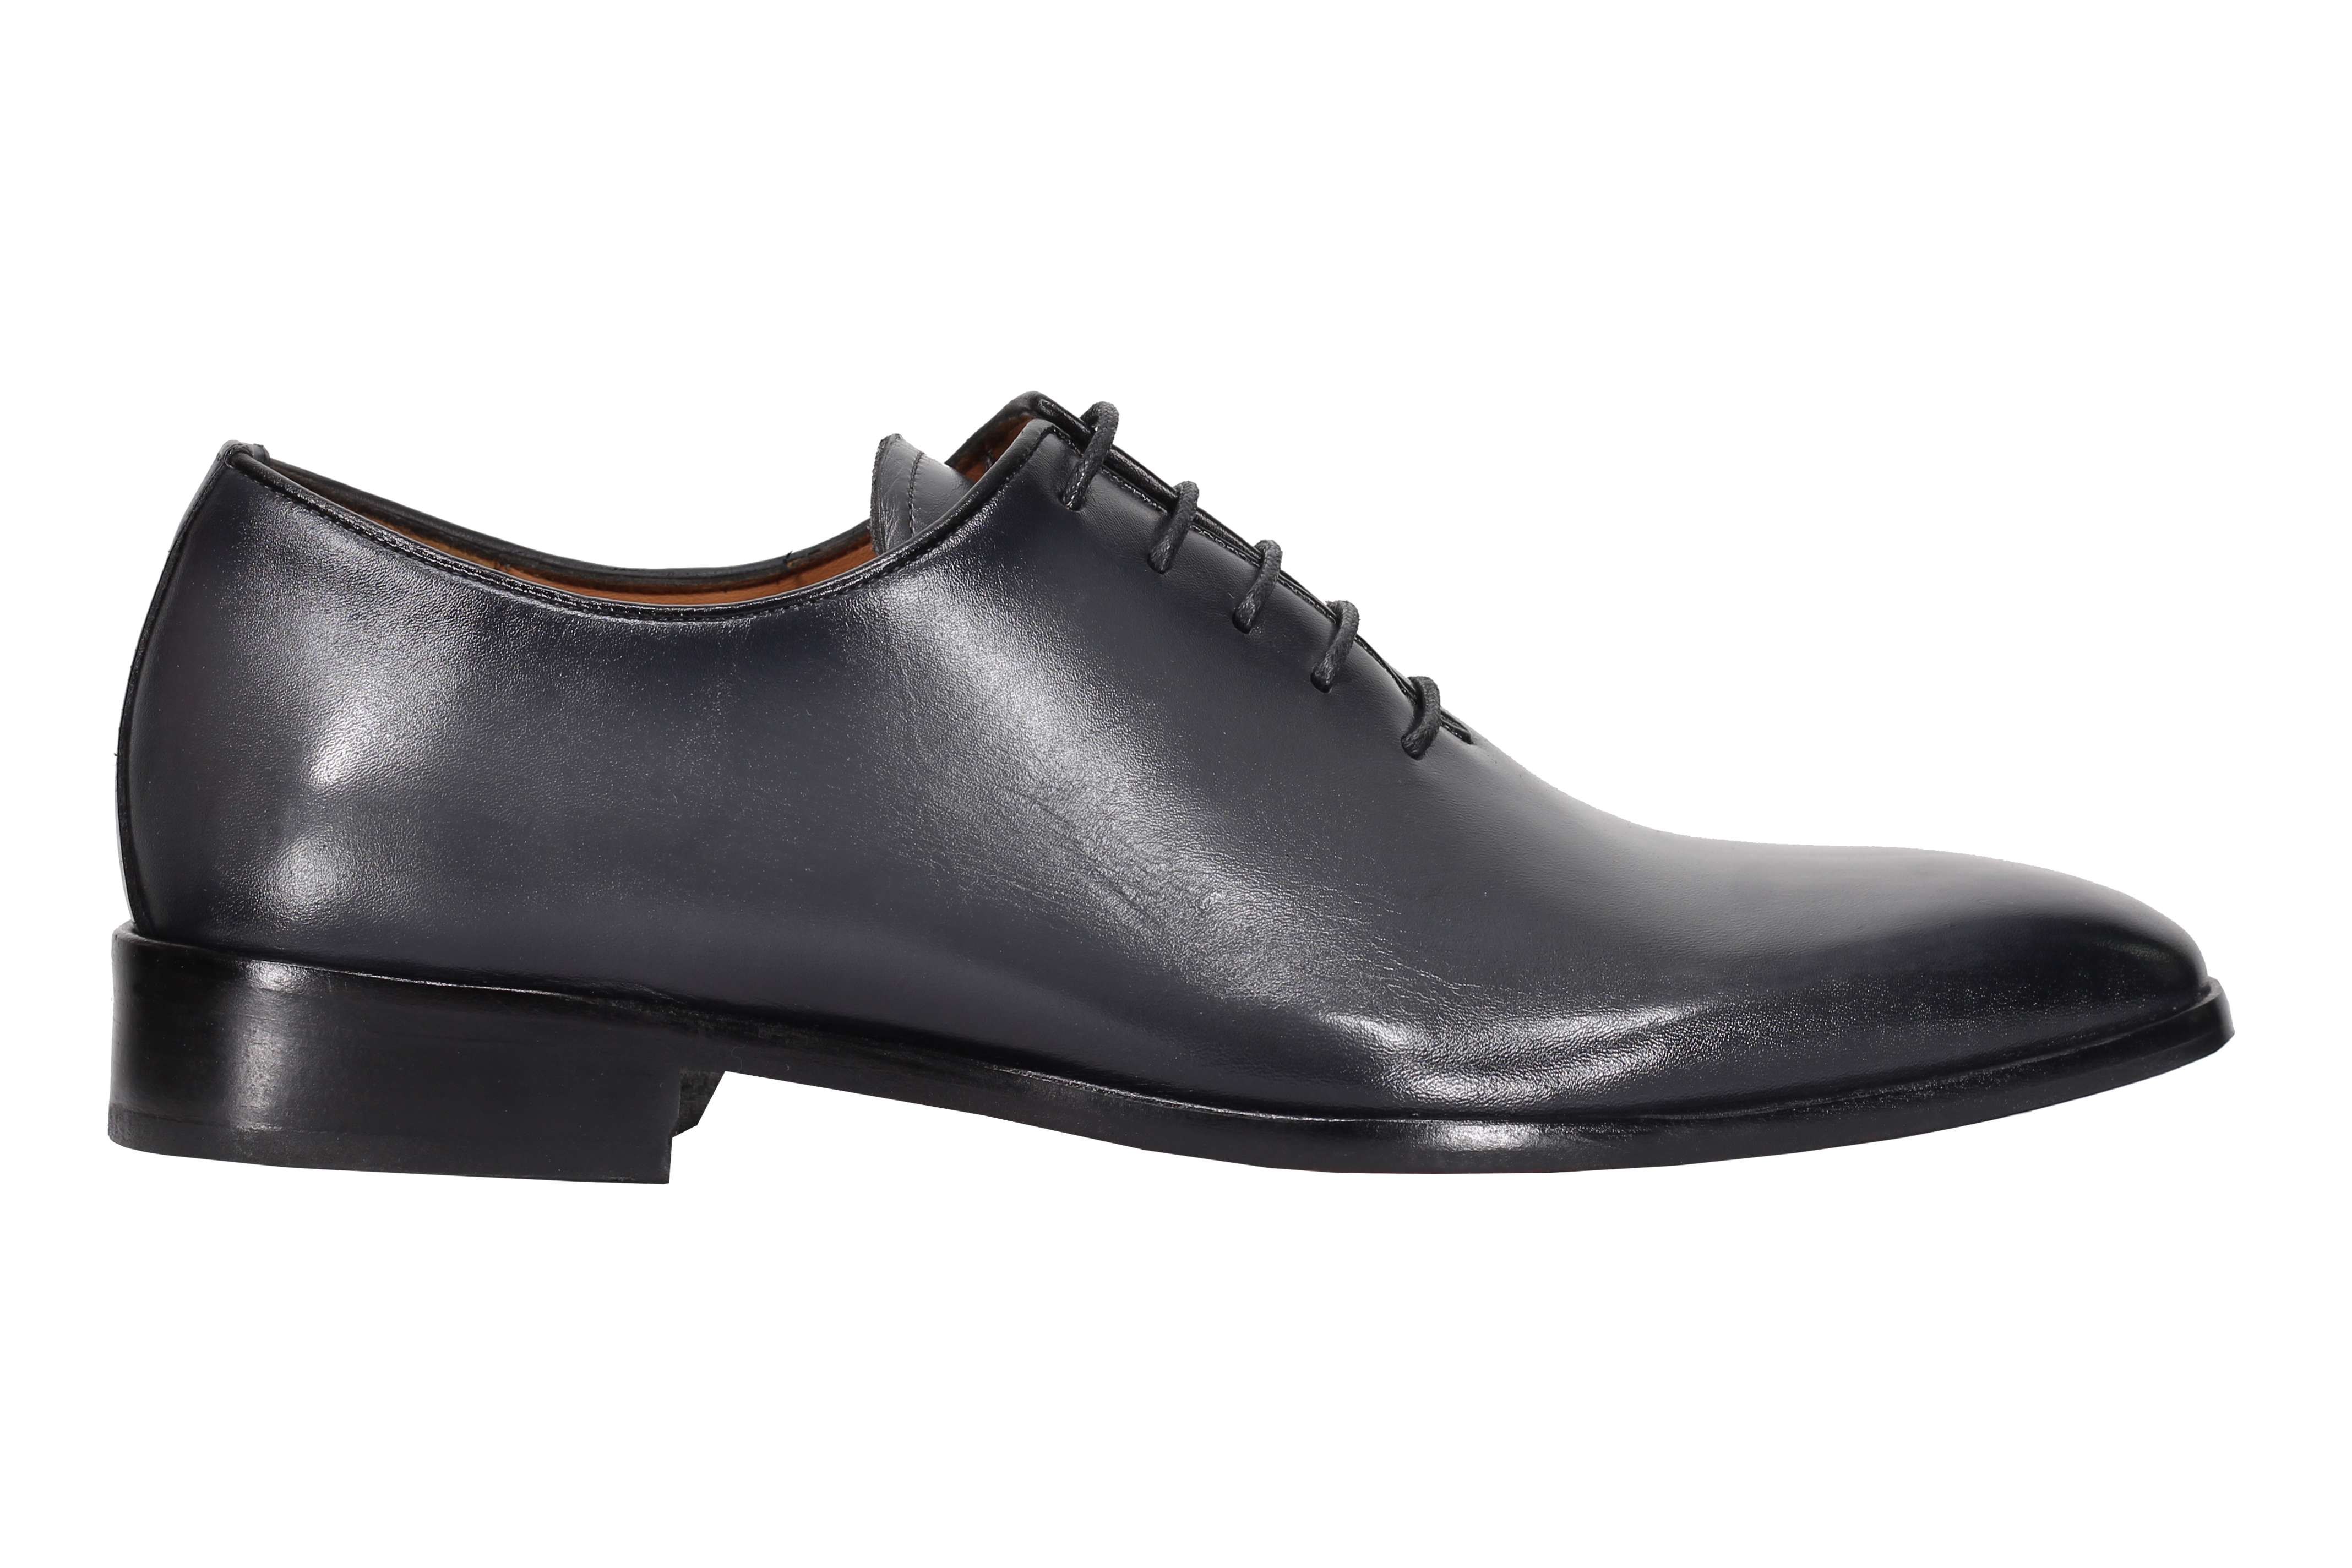 Men's Calf Leather Wholecut Oxford Shoes in Grey